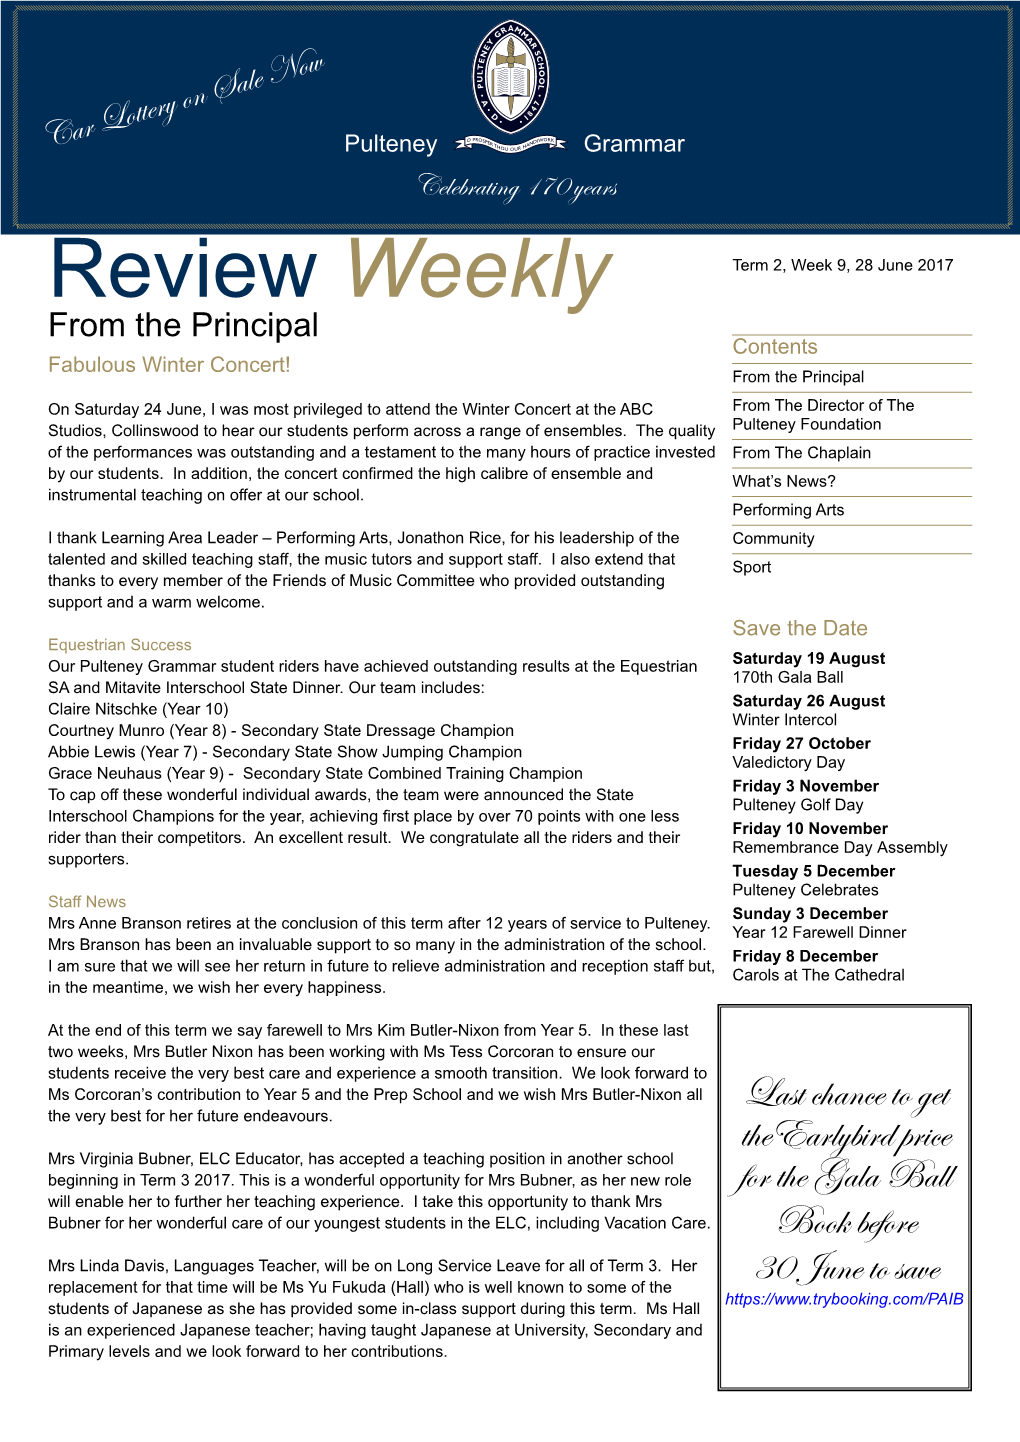 Review Weekly